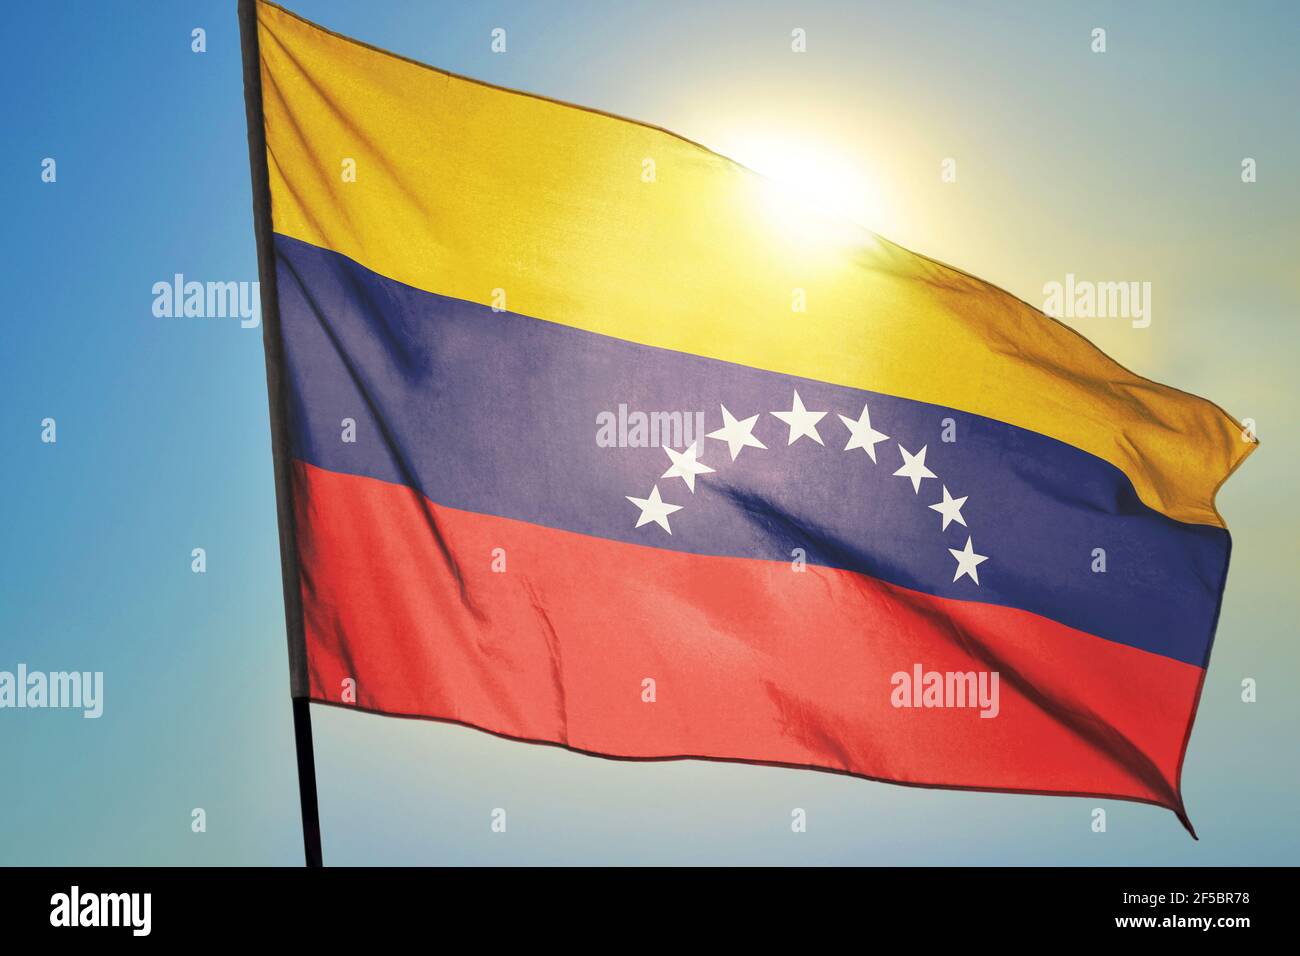 Venezuela flag waving on the wind in front of sun Stock Photo